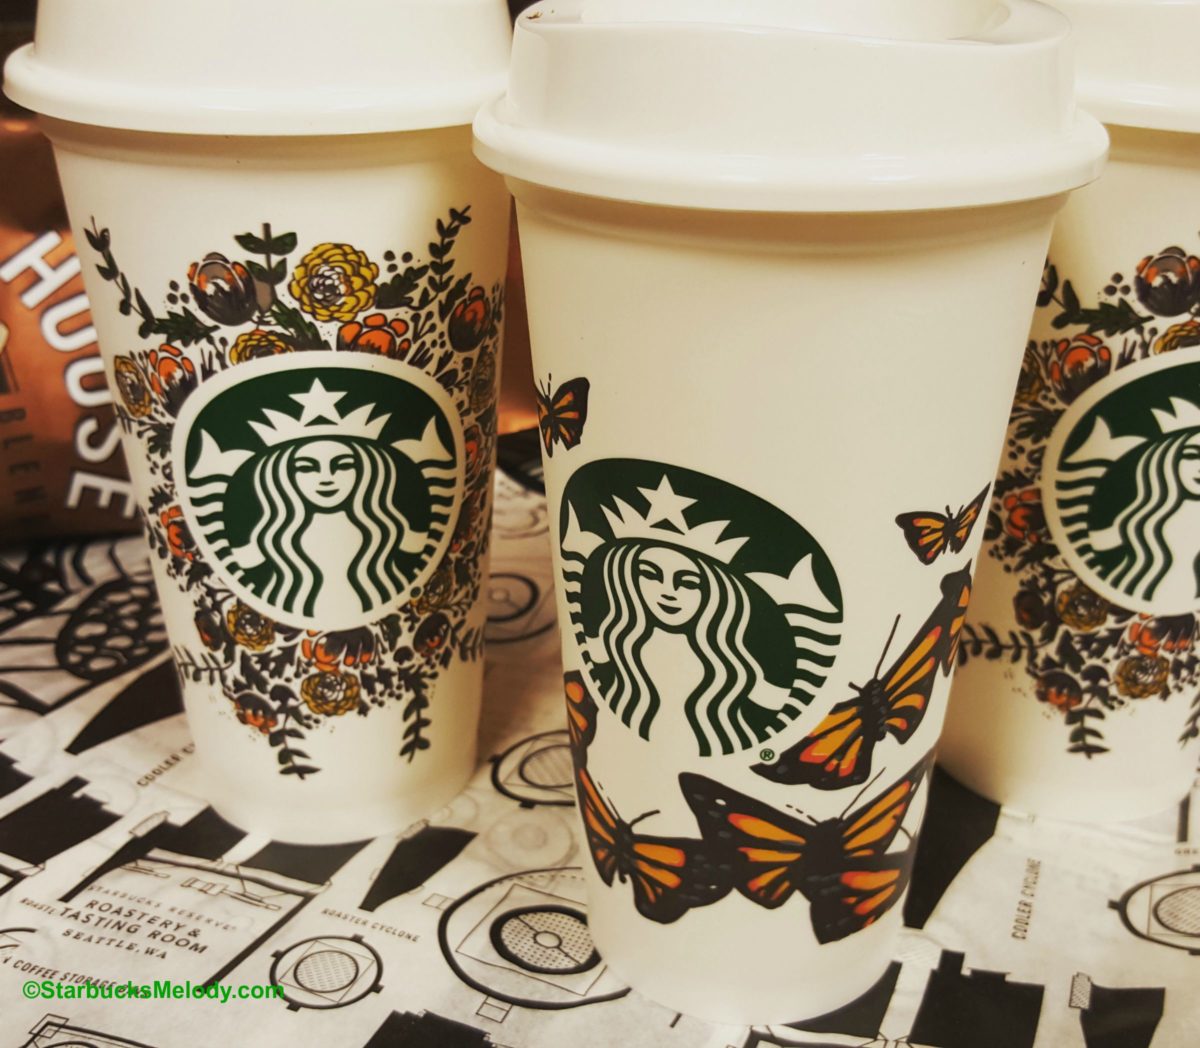 Beautifully decorated reusable Starbucks cups coming soon!